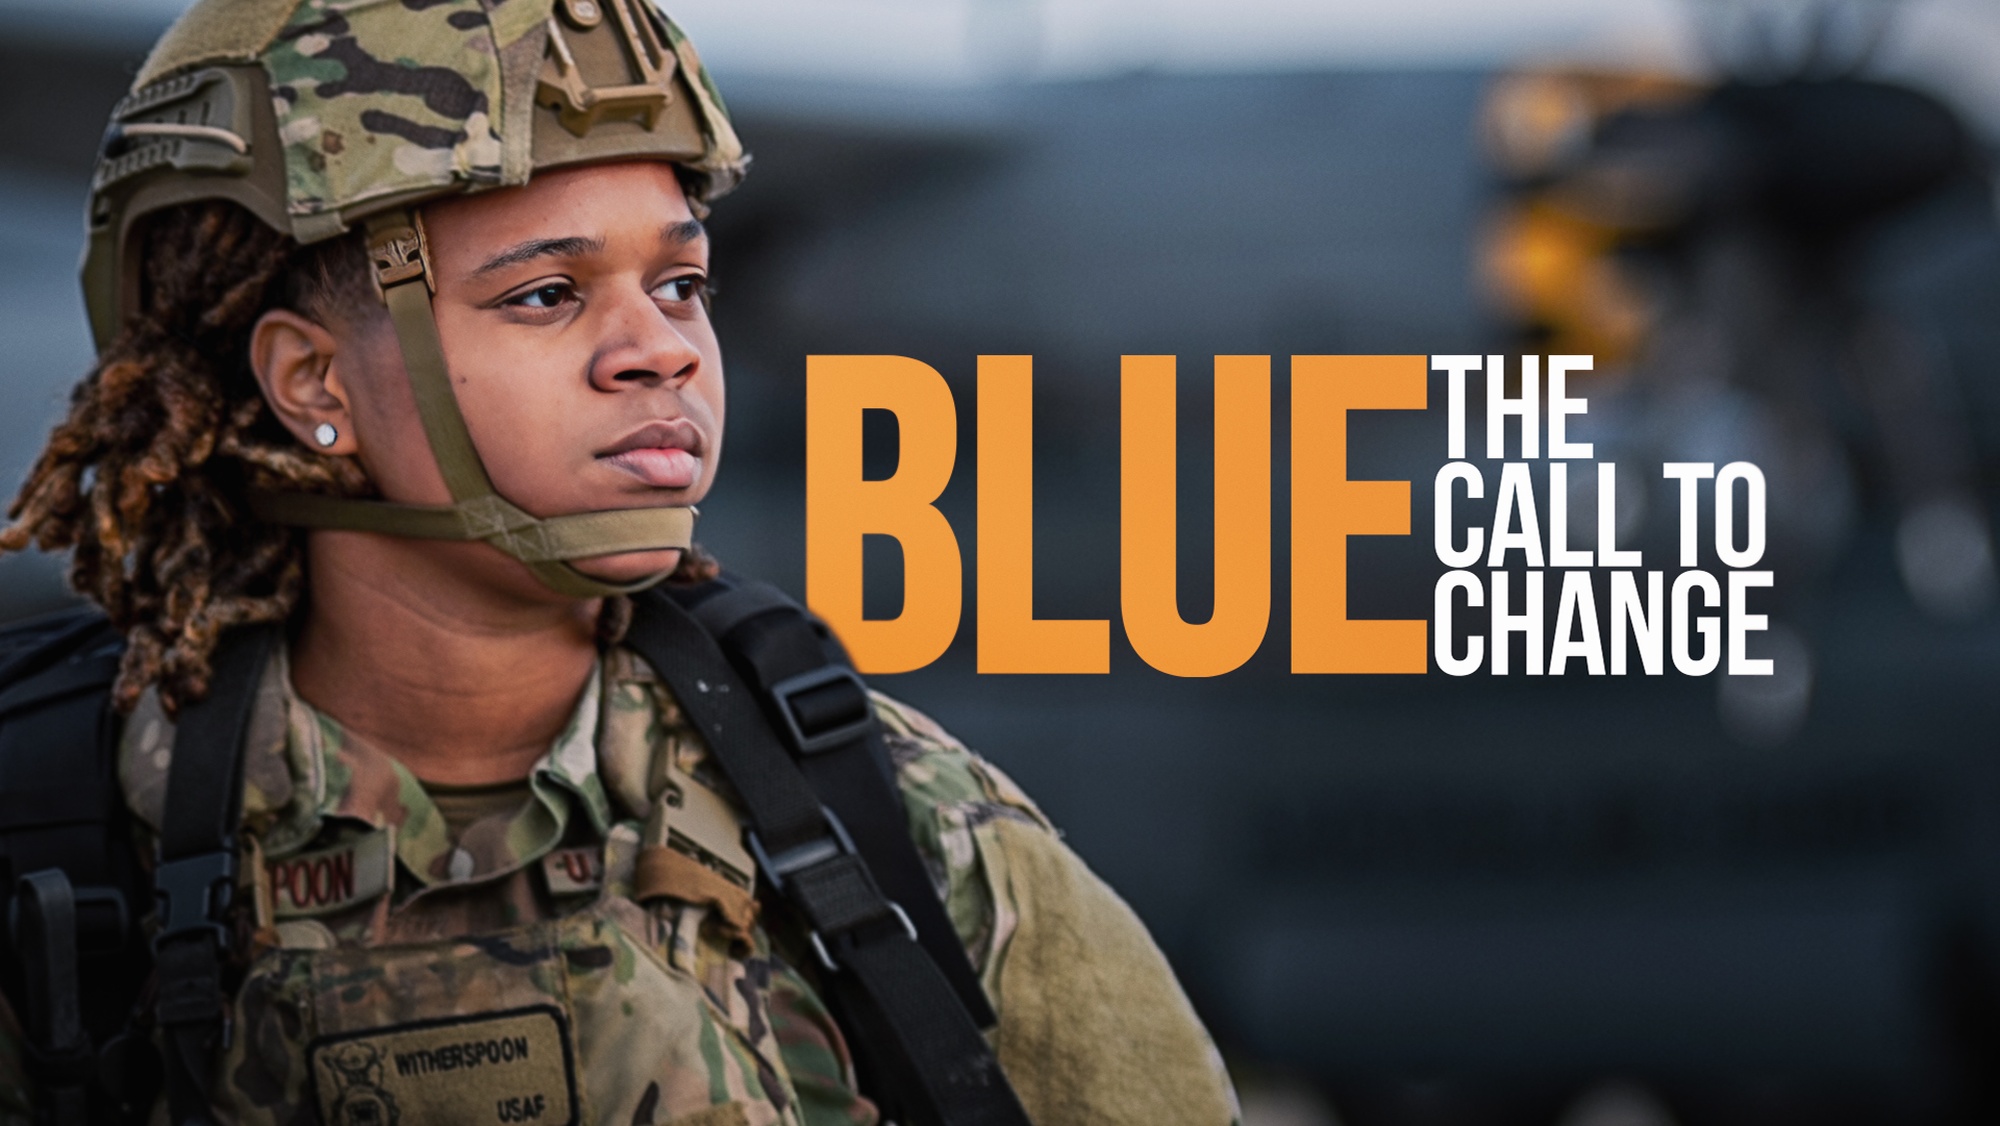 In this edition of BLUE we take a look at how the Department of the Air Force is changing to meet the challenge of reoptimizing for great power competition.  From how the service is structured to how servicemembers will be trained and deployed, we look at what’s driving change, and how it impacts people.